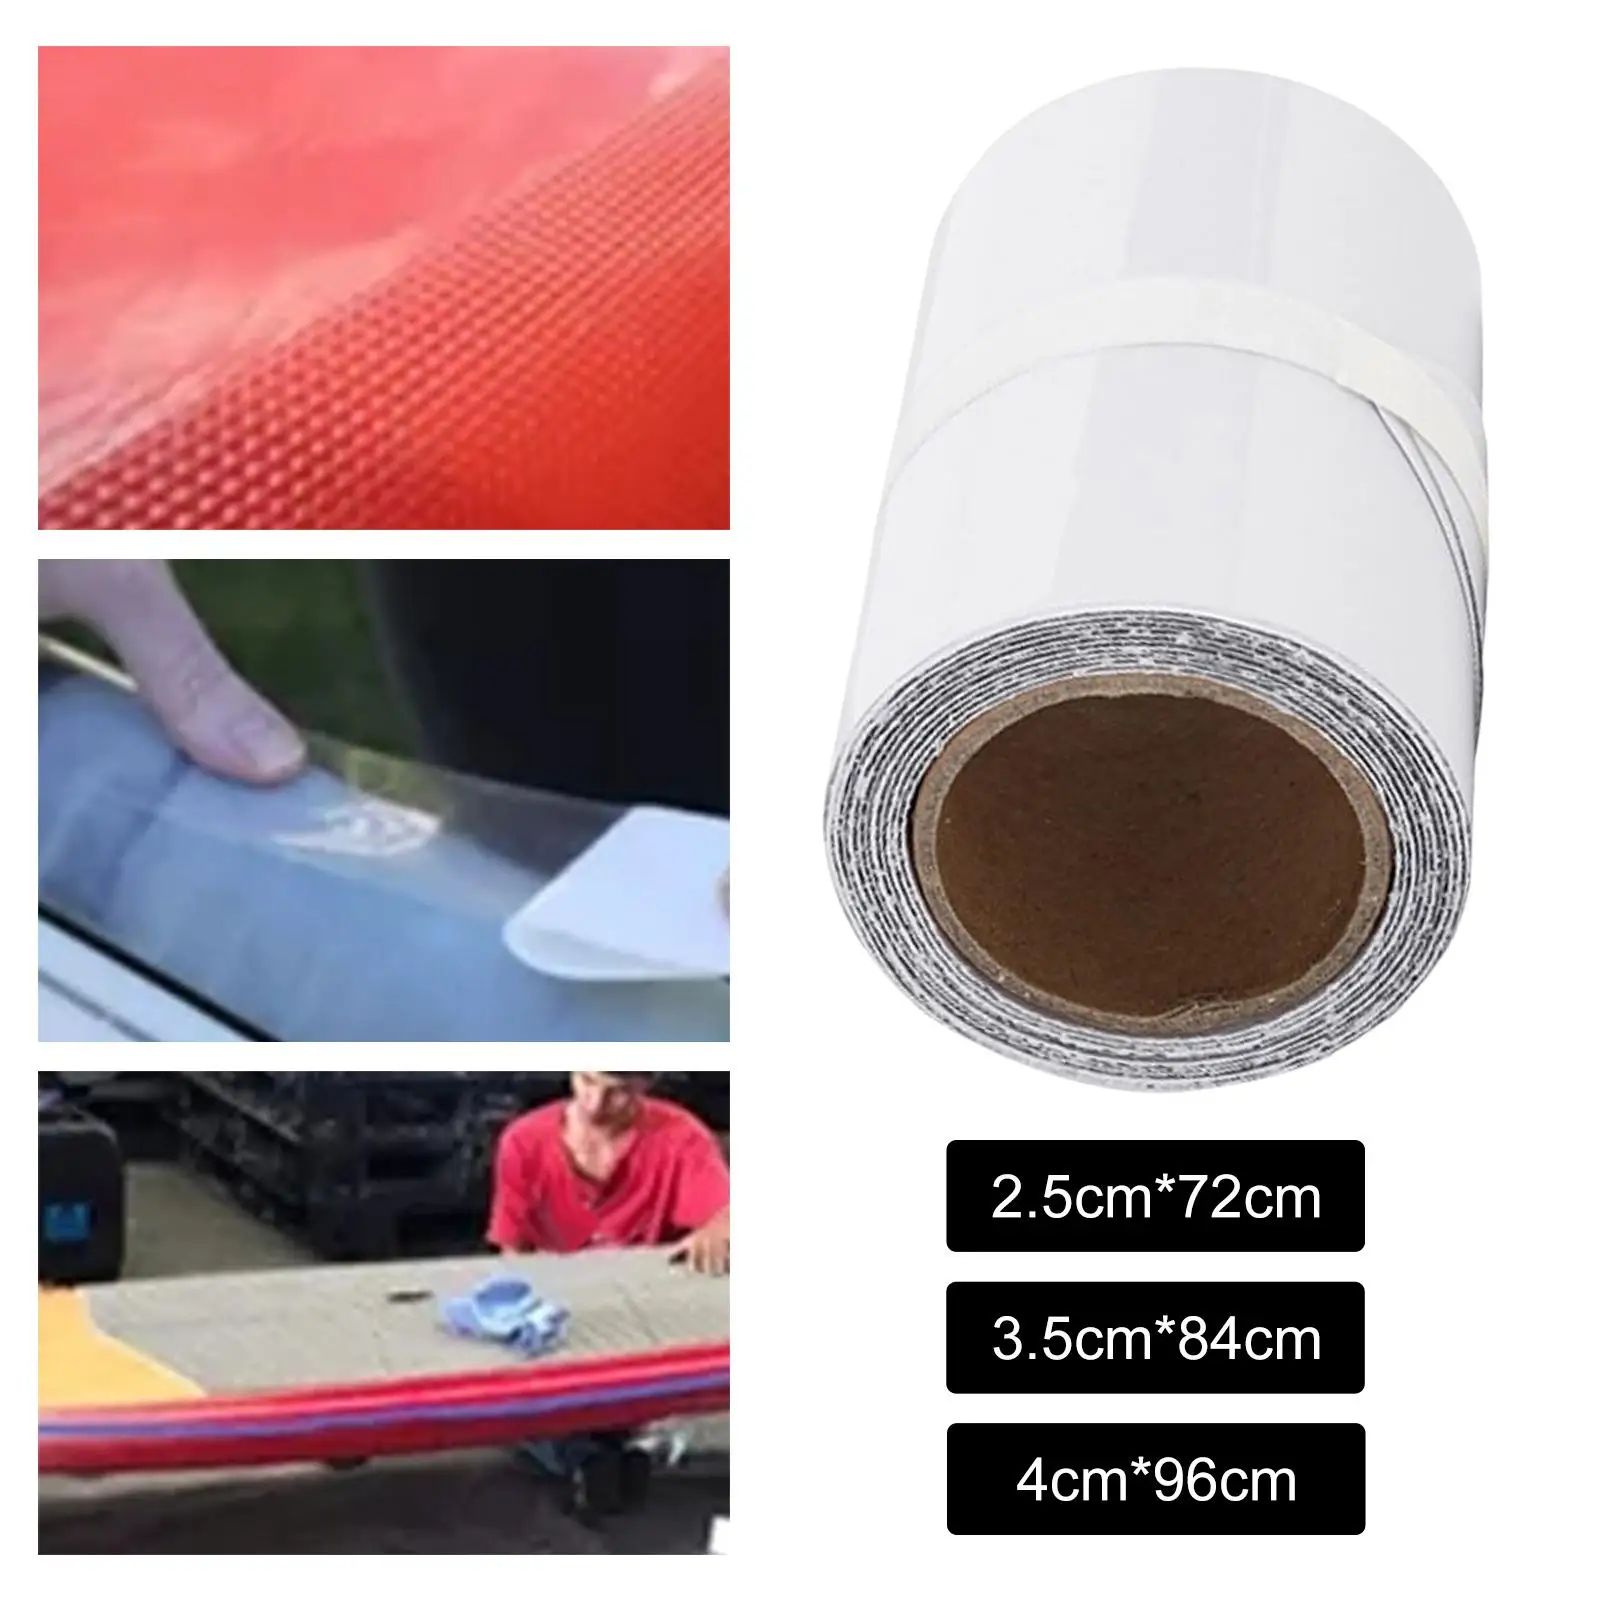 Surfboard Protection Tape Surfboard Rail Protective Film Fit for Vacation Outdoor